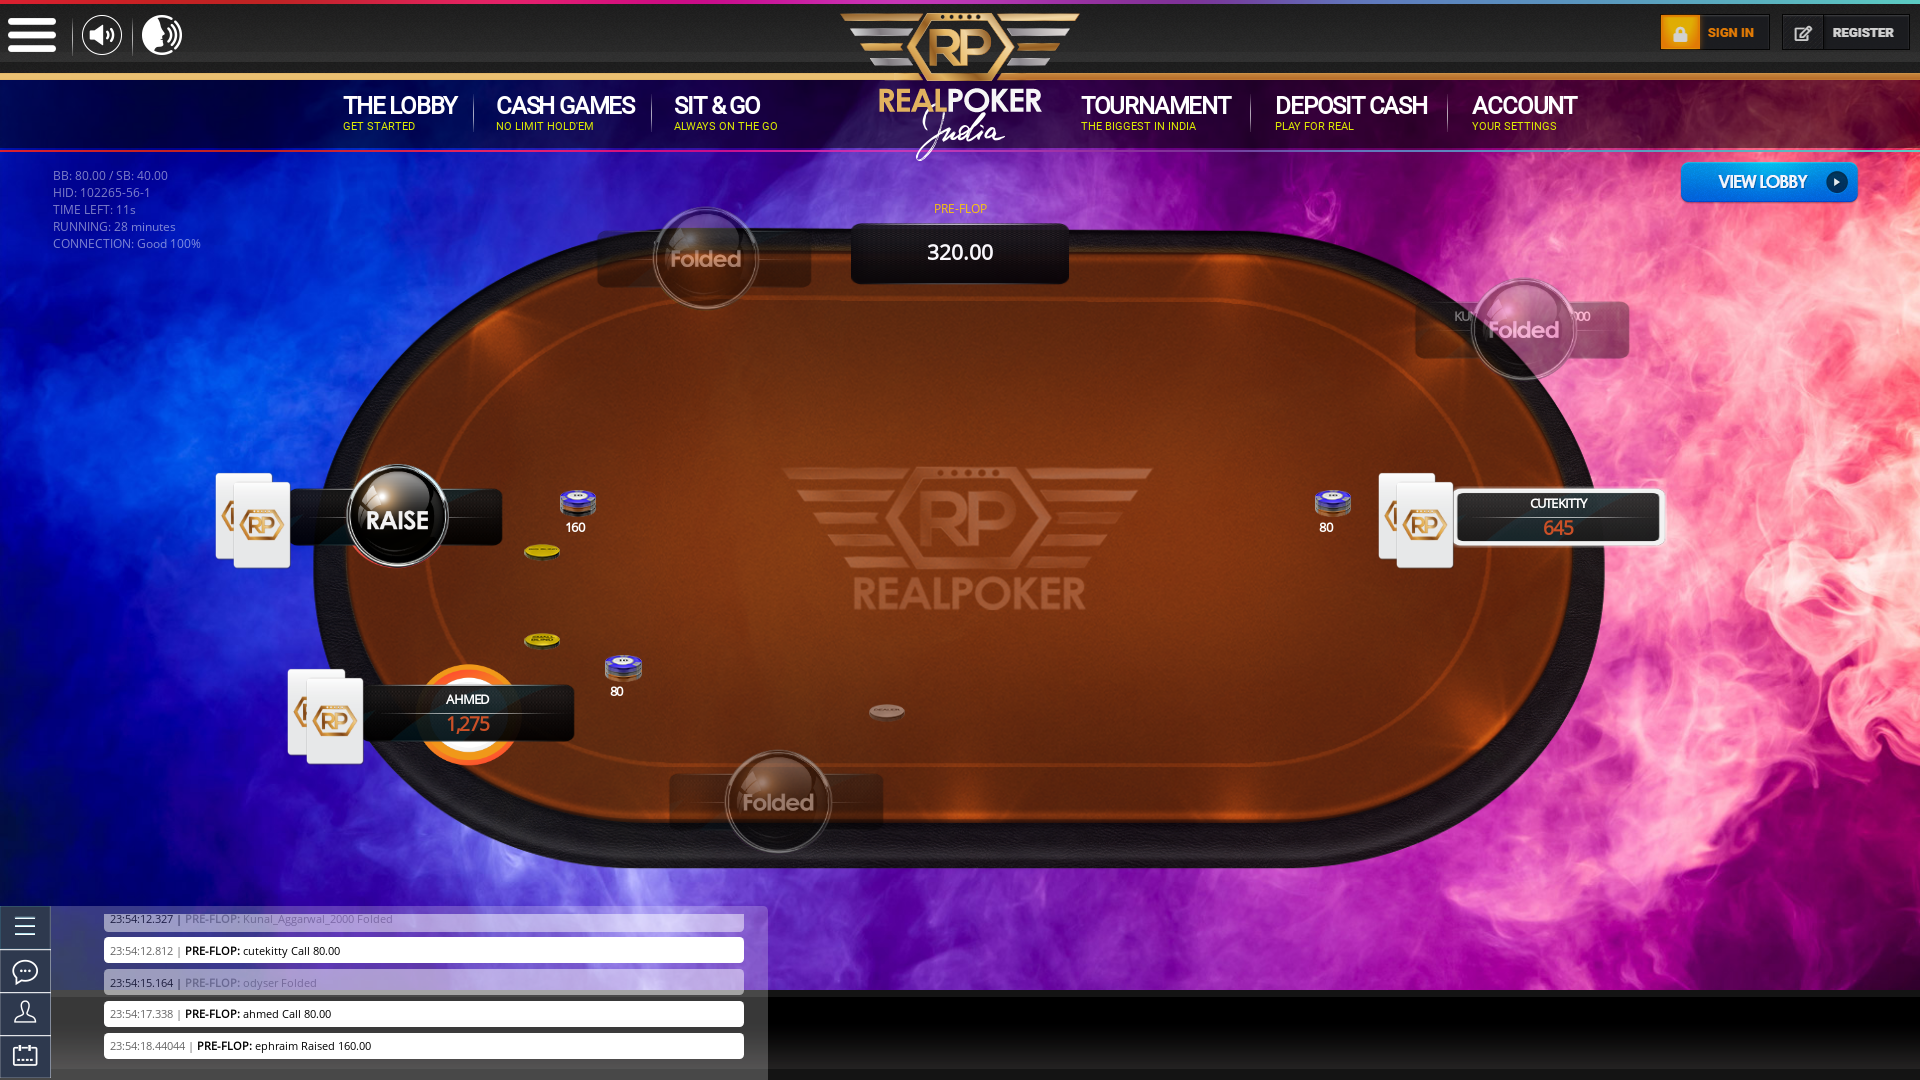 10 player texas holdem table at real poker with the table id 102265